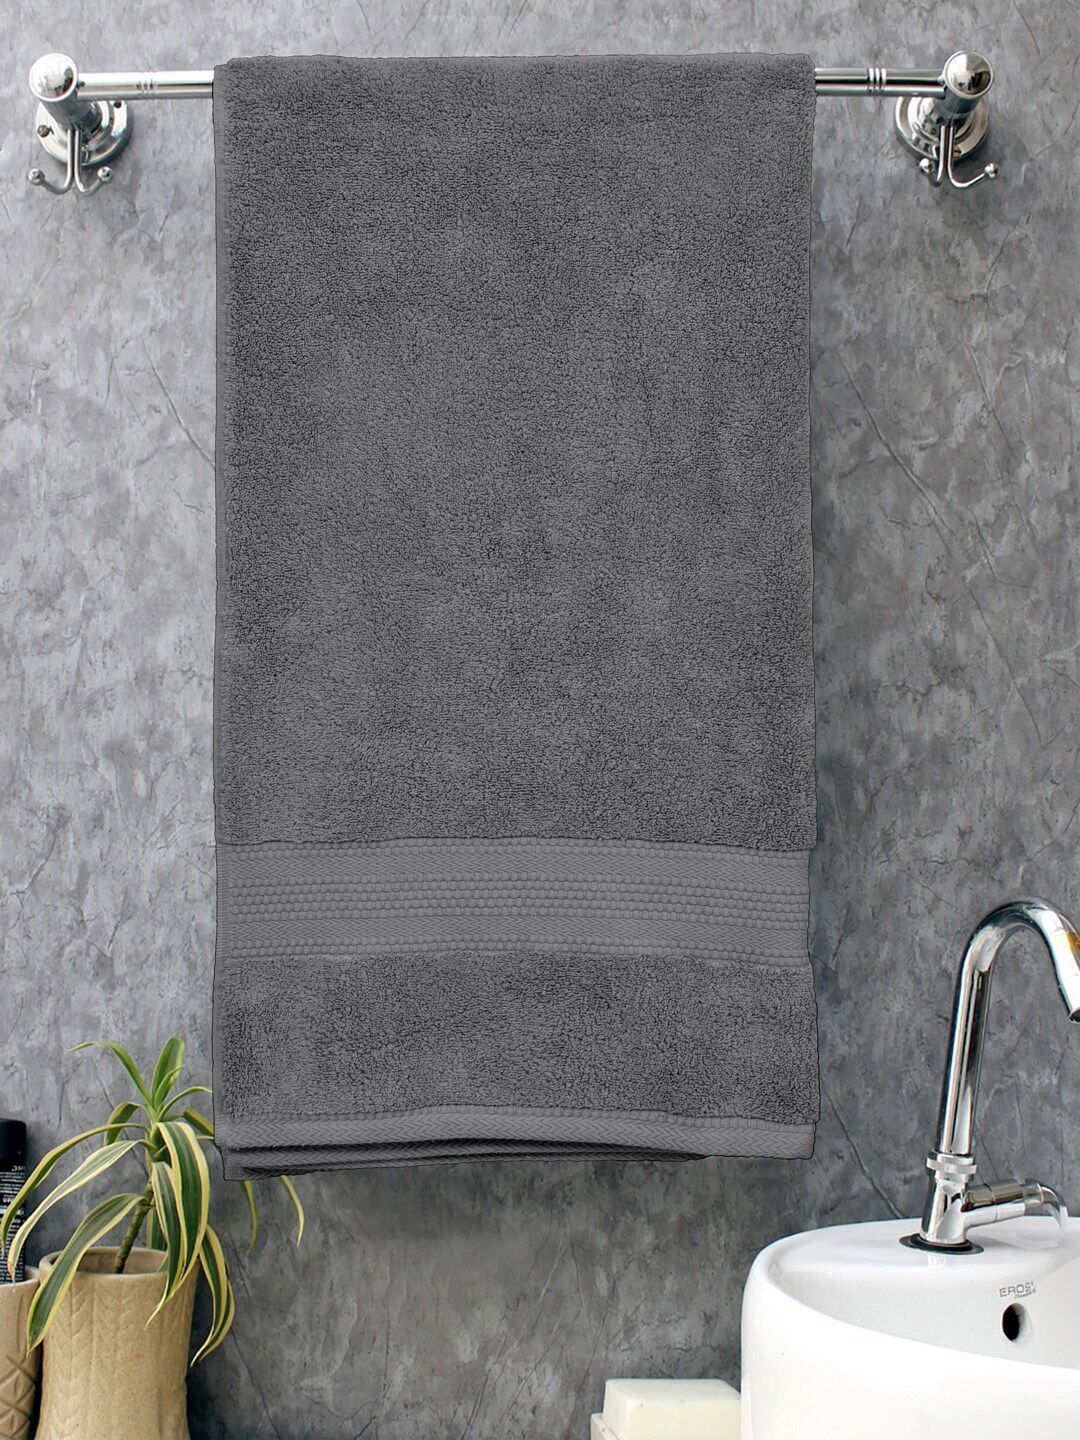 BOMBAY DYEING Charcoal Grey Solid Cotton 650 GSM Bath Towel Price in India